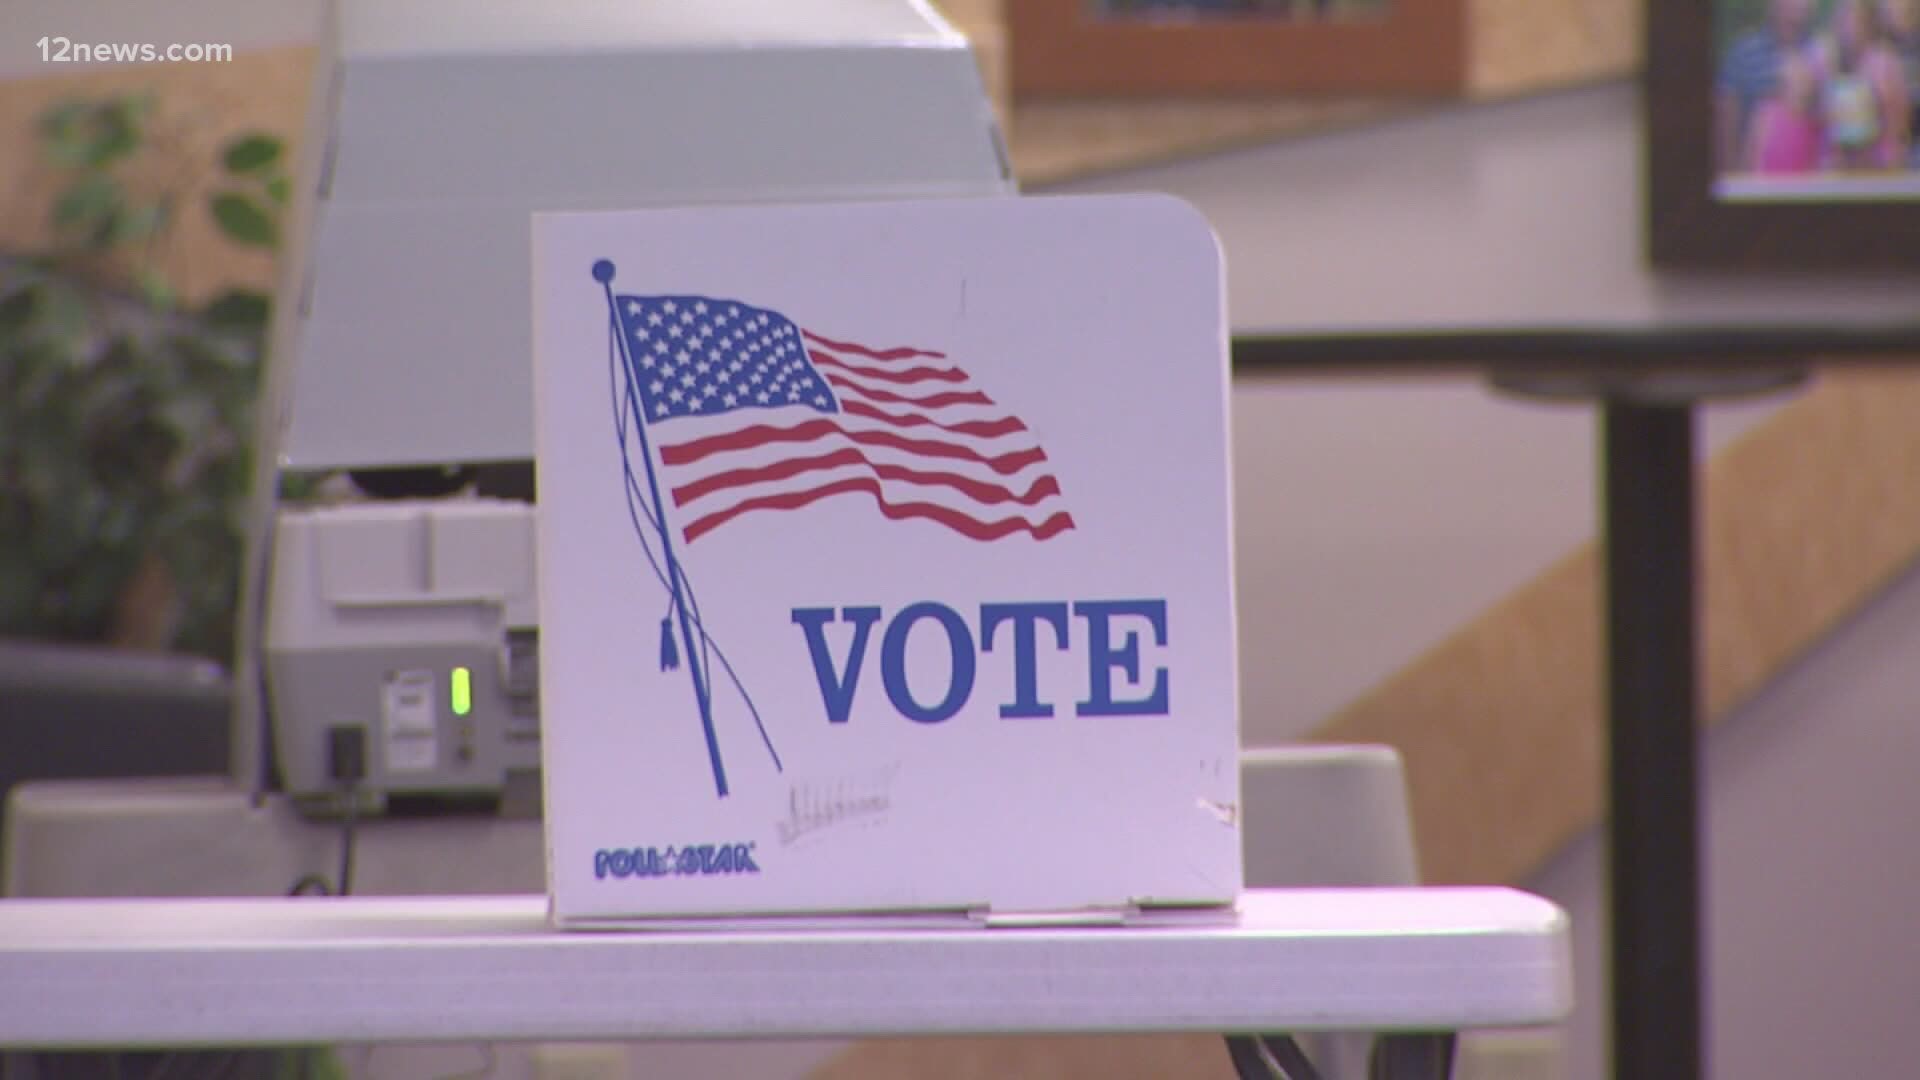 Maricopa County is now moving to a Vote Center election model, which will provide more access. Voters can vote by mail or in-person from July 8th through August 4th.